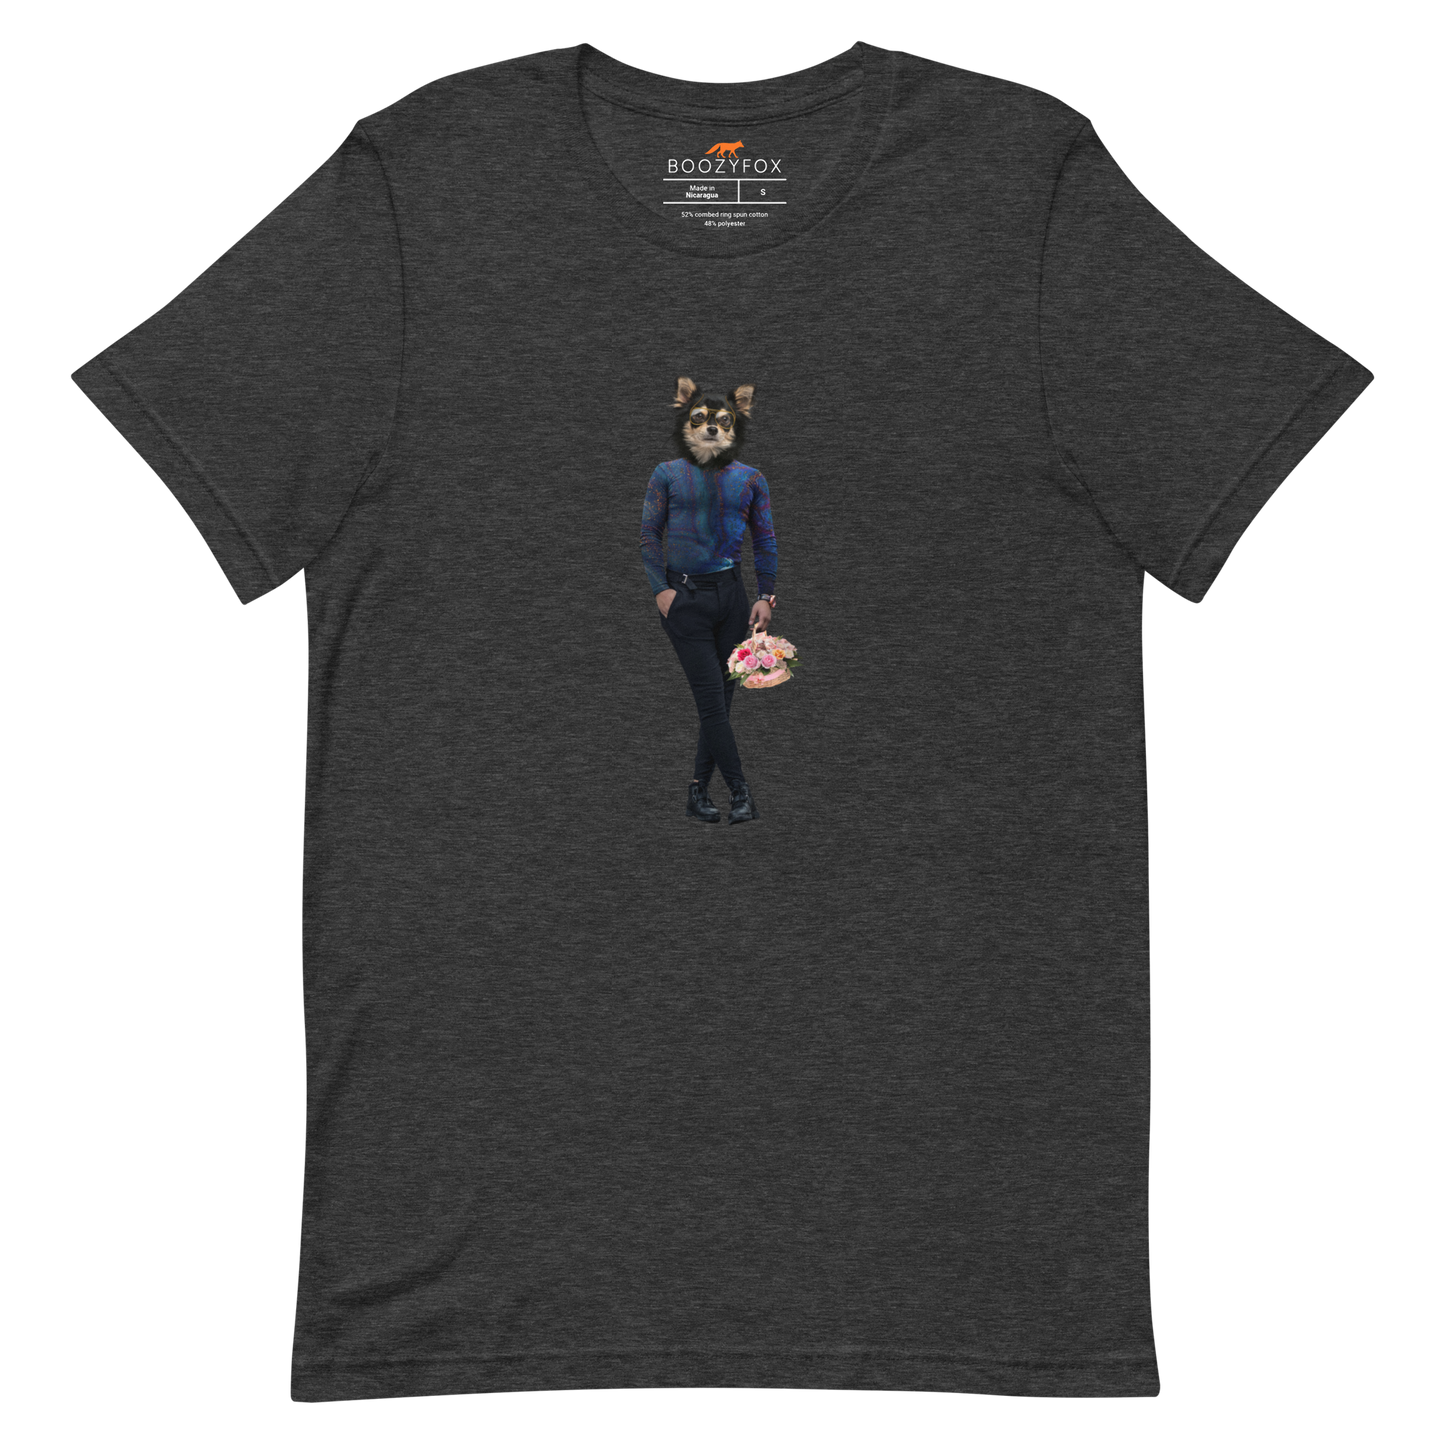 Dark Grey Heather Premium Dog T-Shirt featuring an Anthropomorphic Dog graphic on the chest - Funny Graphic Dog Tees - Boozy Fox